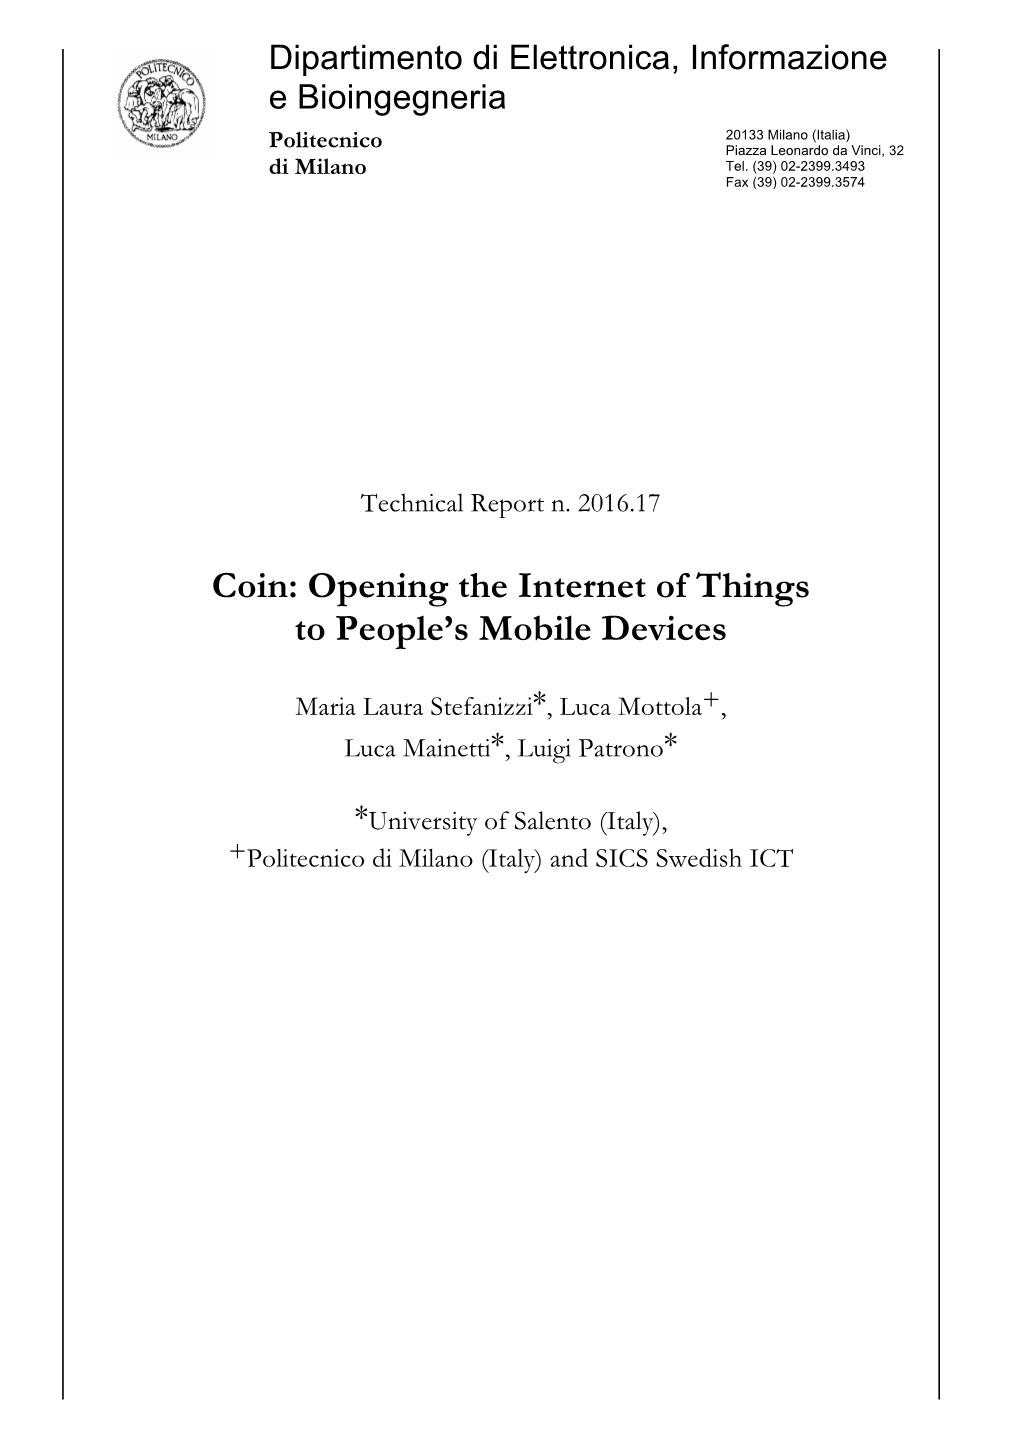 Coin: Opening the Internet of Things to People's Mobile Devices